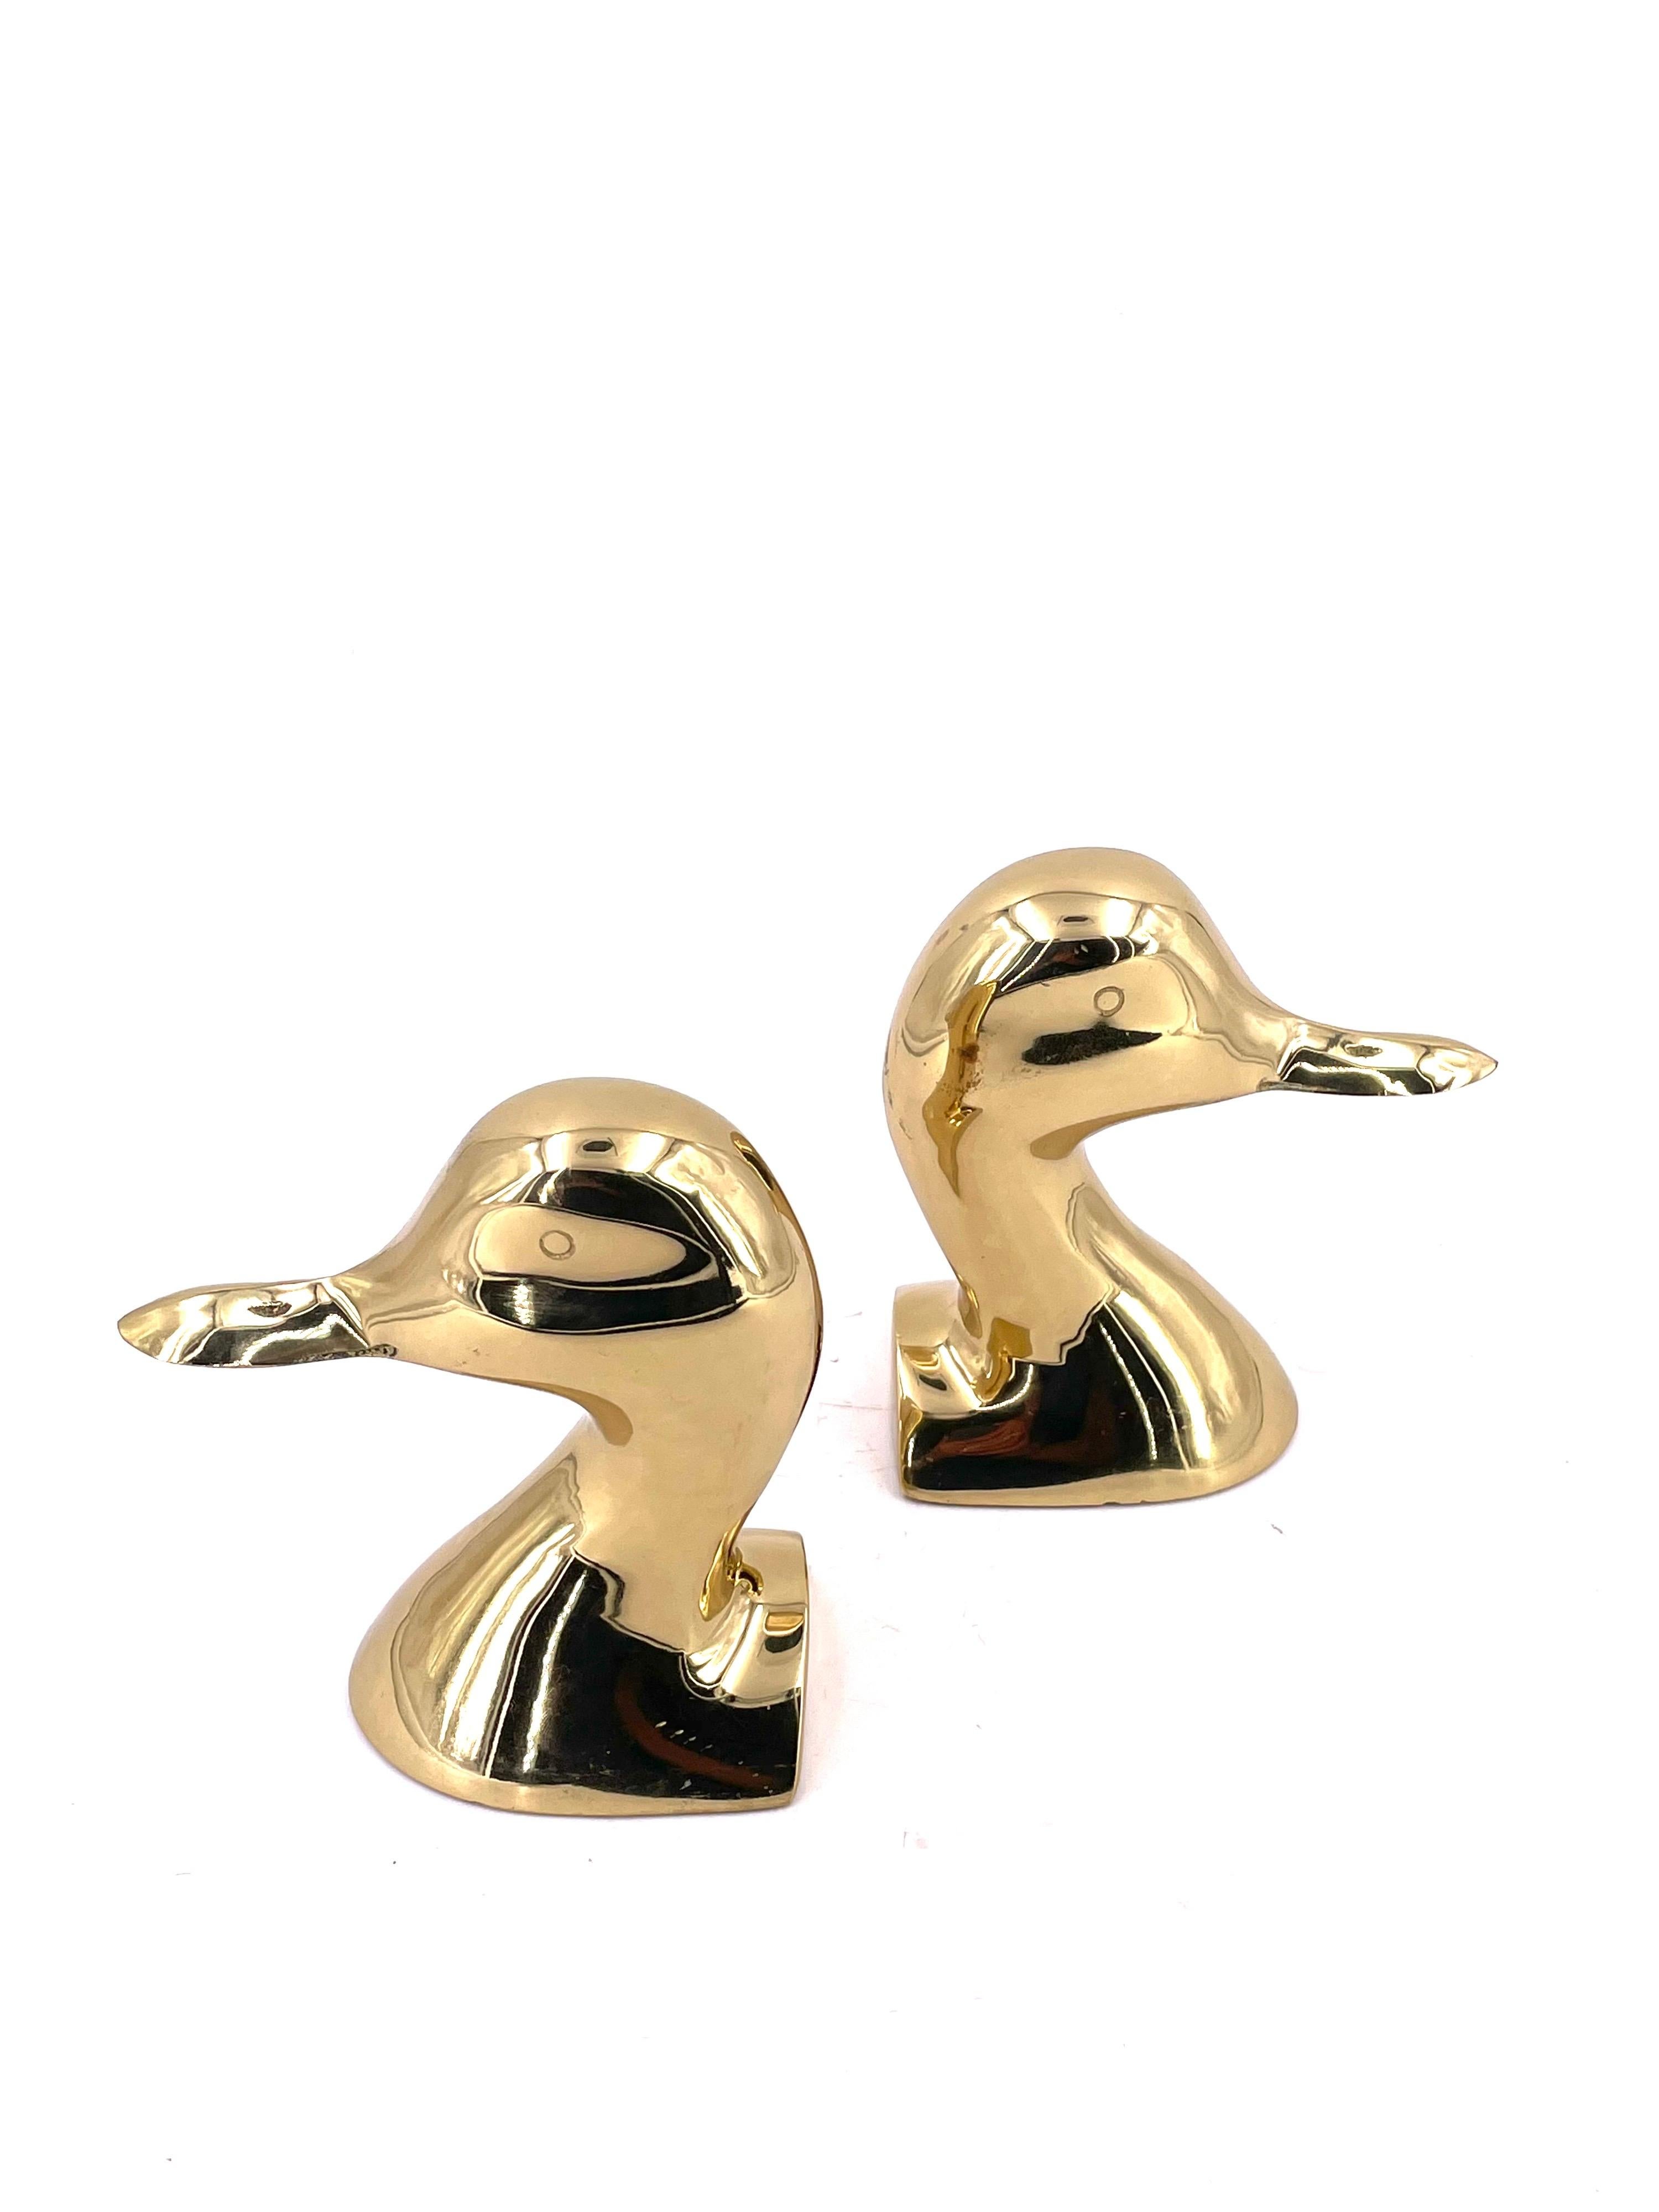 Hollywood Regency Mid-Century Modern Solid Brass Duck Bookends